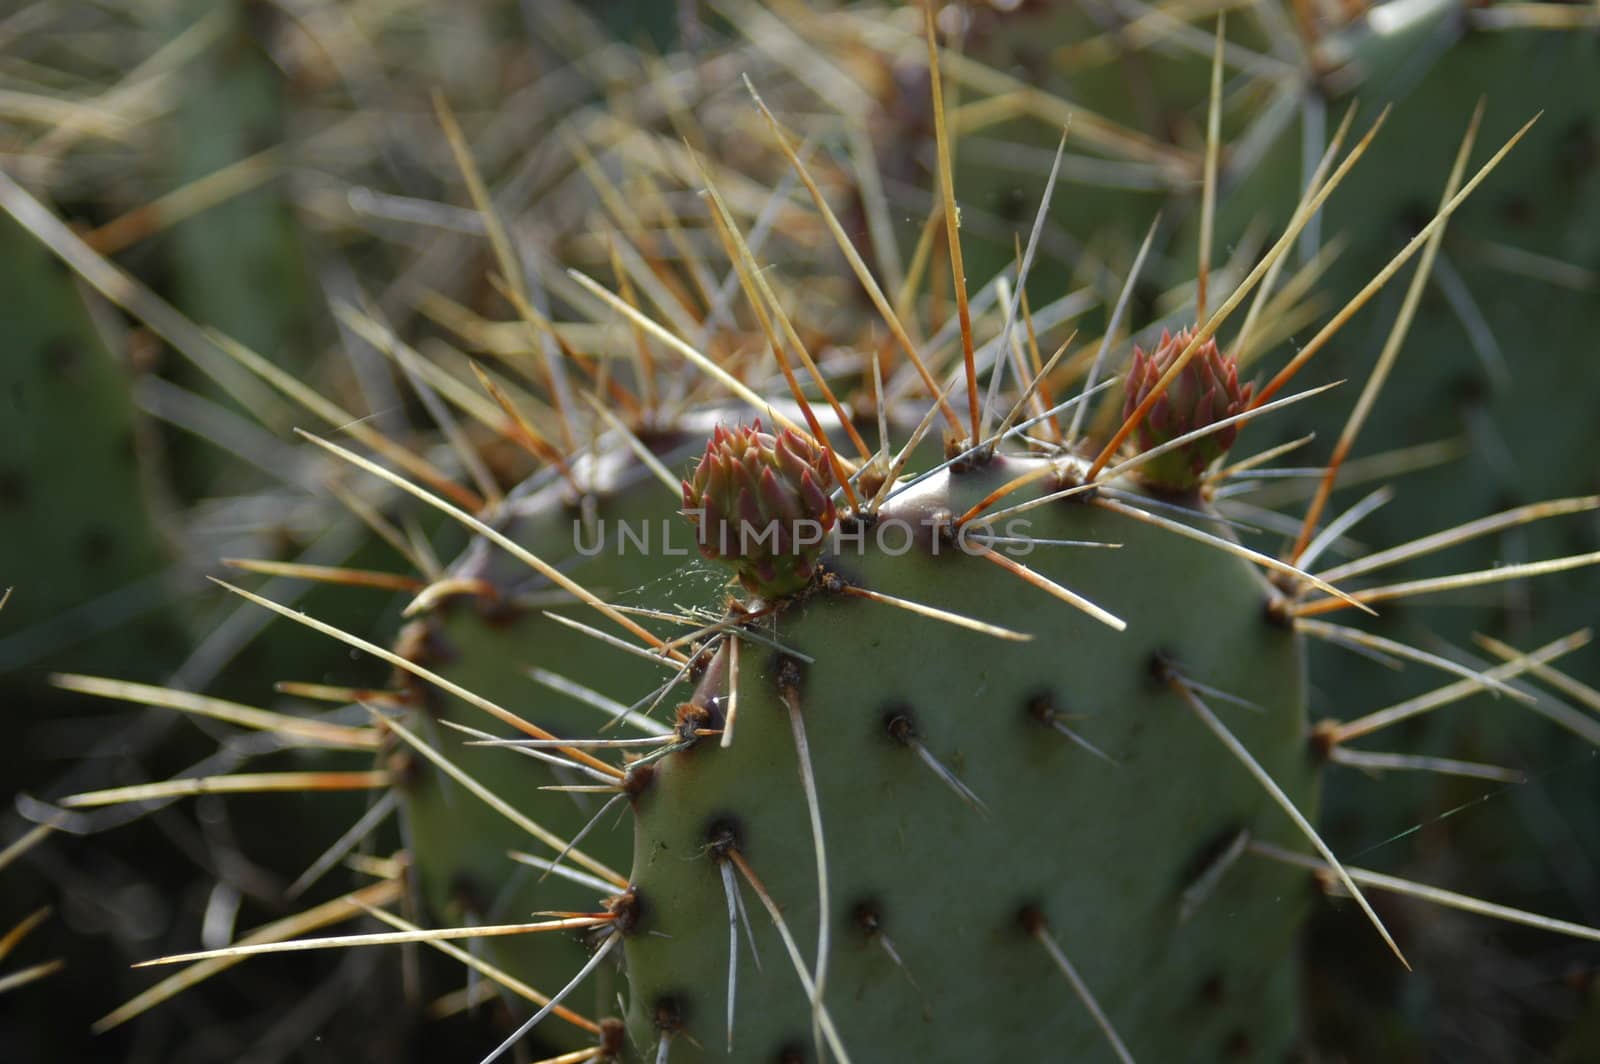 Closeup of view of a prickly cactus